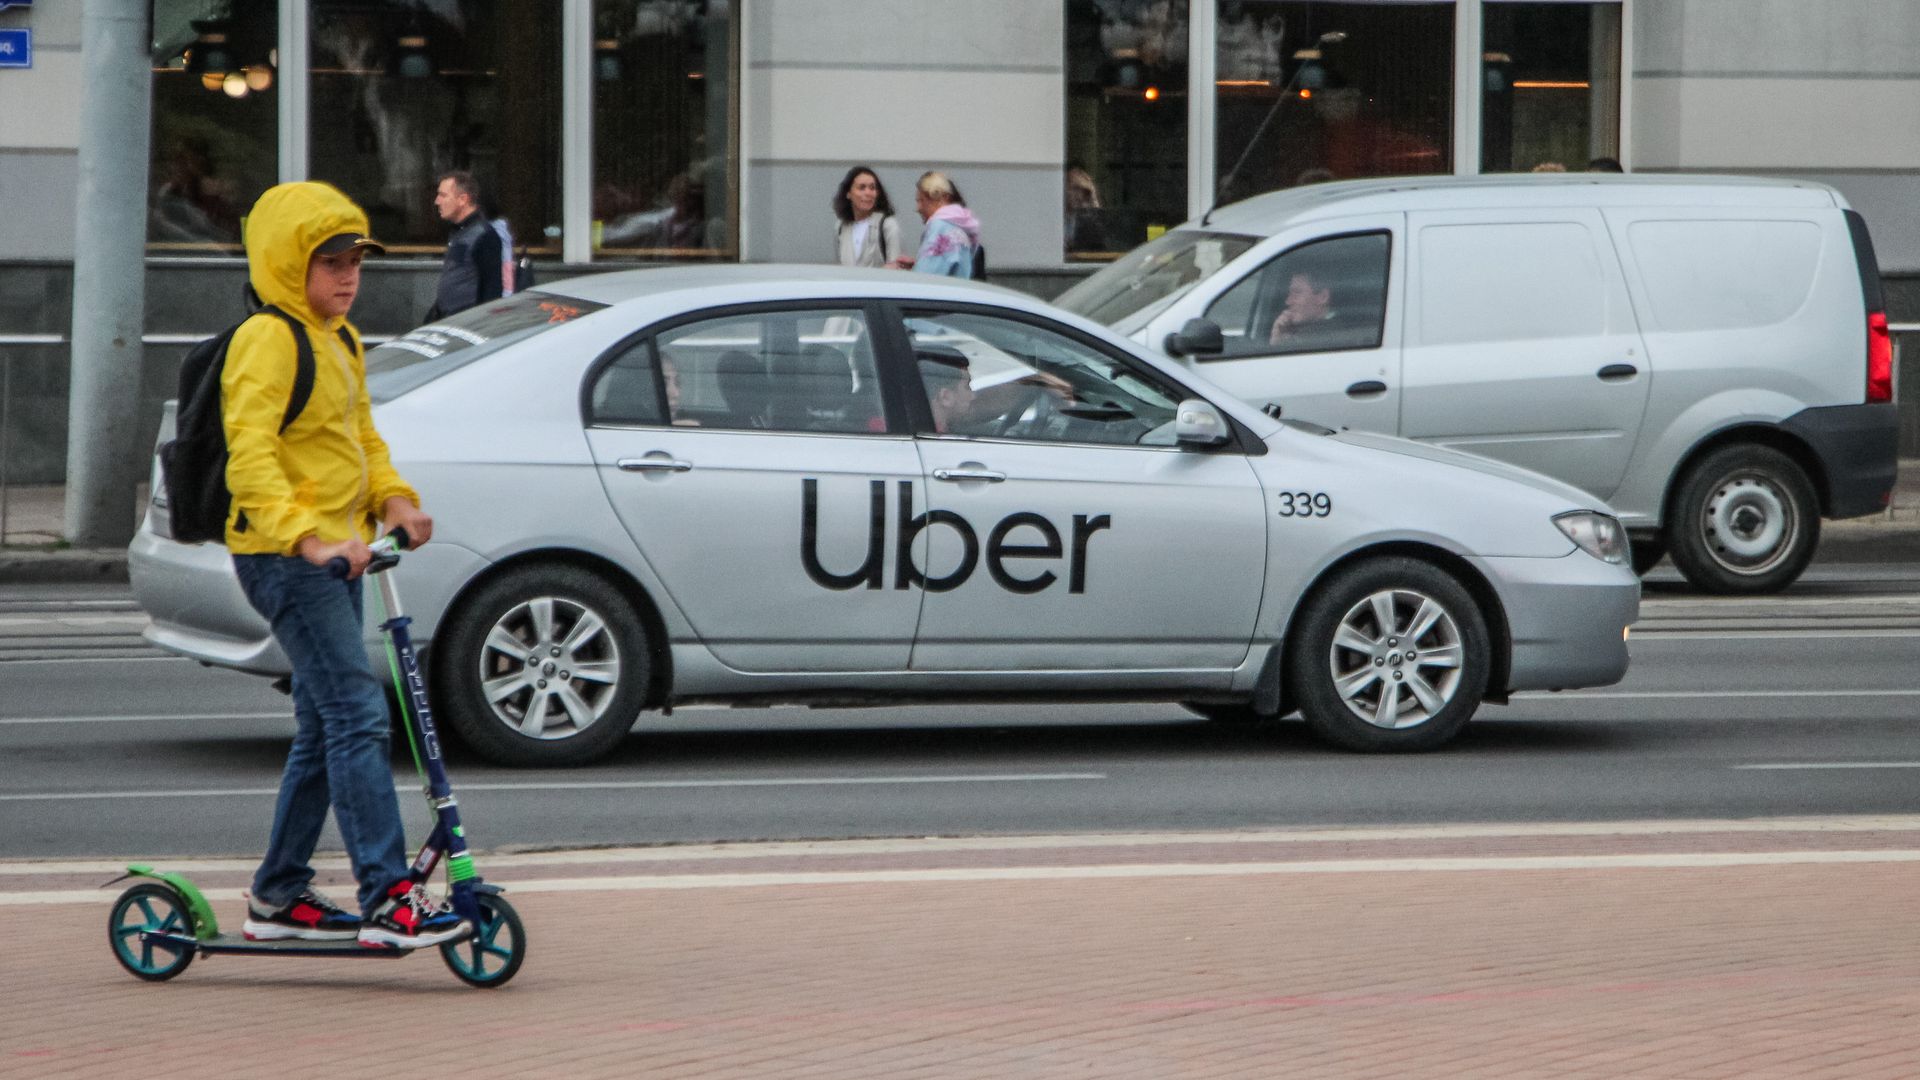 A child rides his scooter in the foreground as an uber car drives in the back.